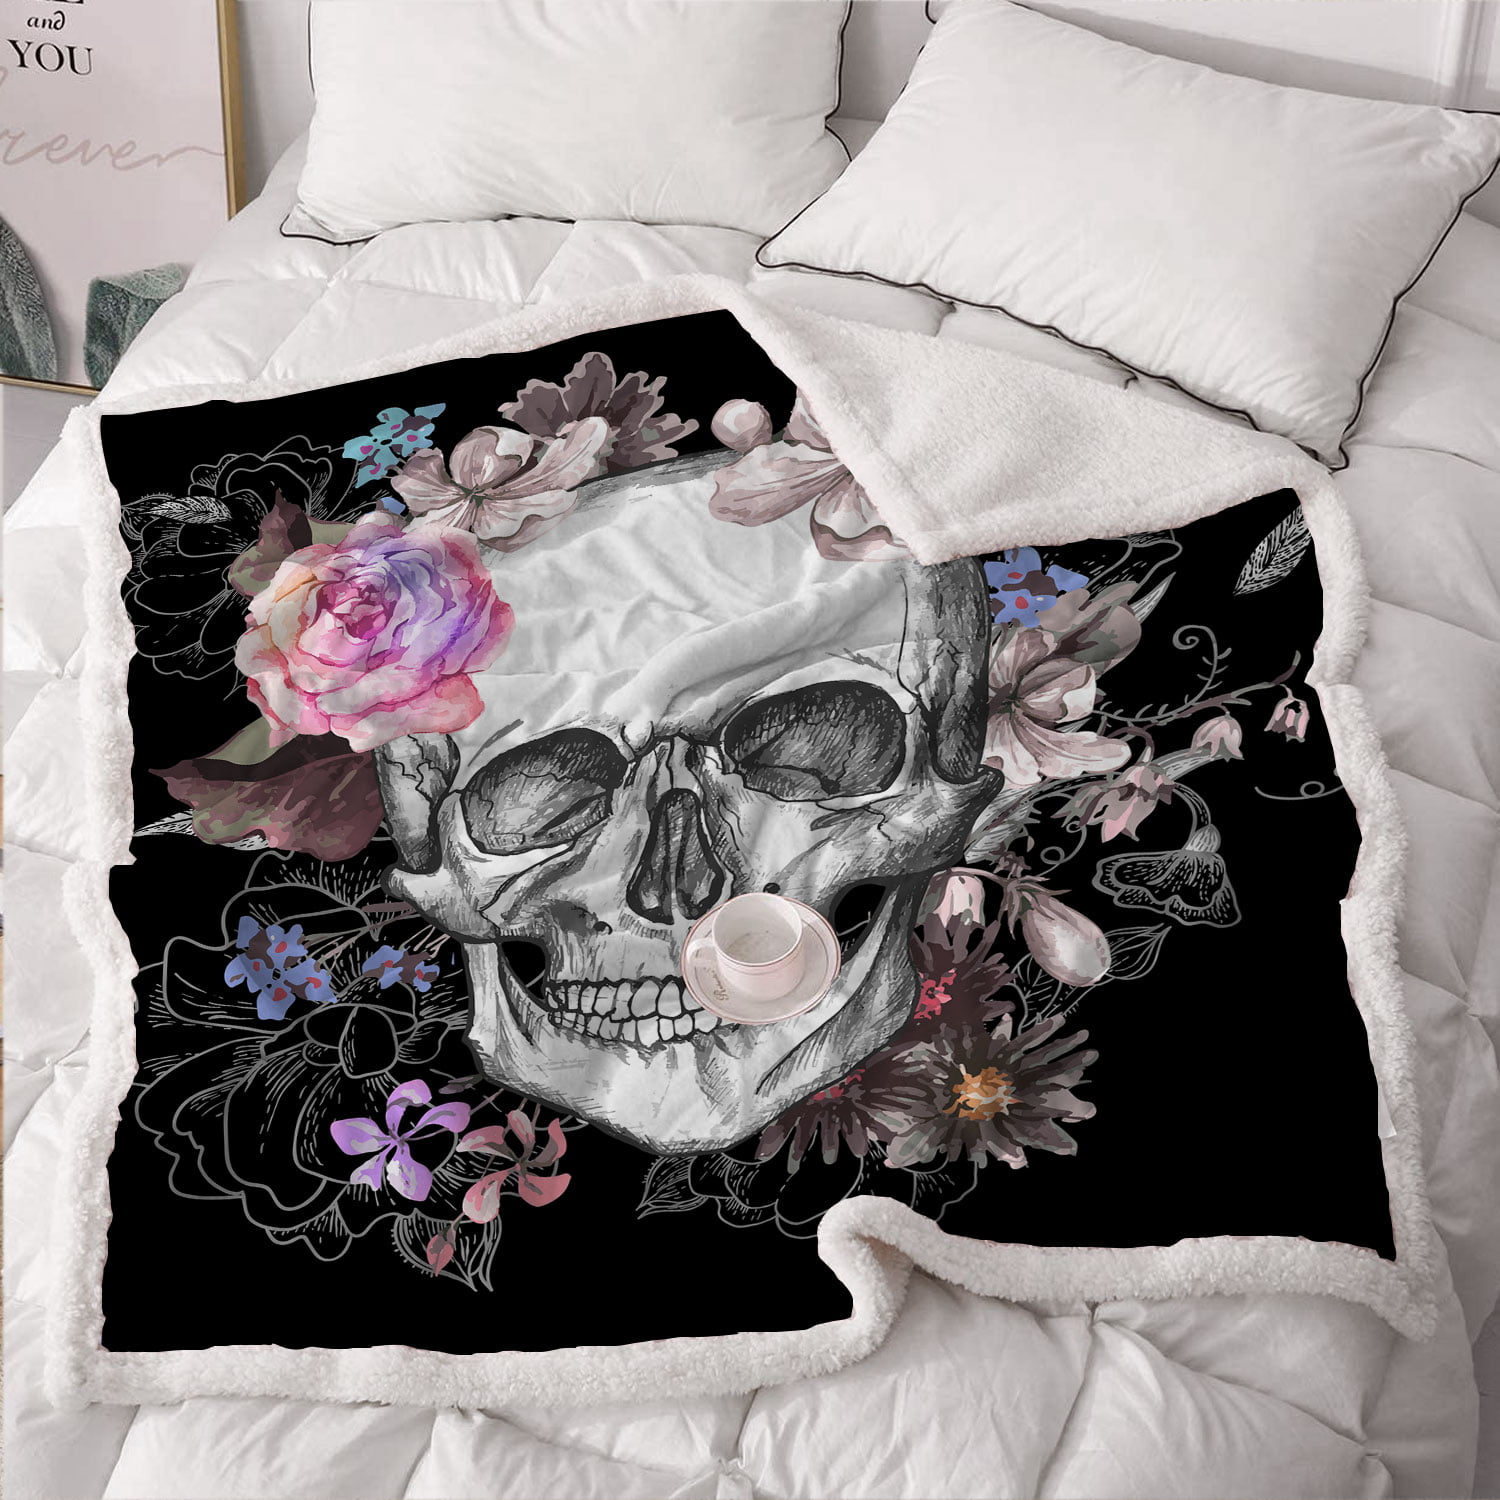 Pink Floral Sugar Skull Flower Blanket Flannel Throw Blanket for Couch Decorative Soft Fluffy Cozy Sofa Bed Bedroom 50X60 inch